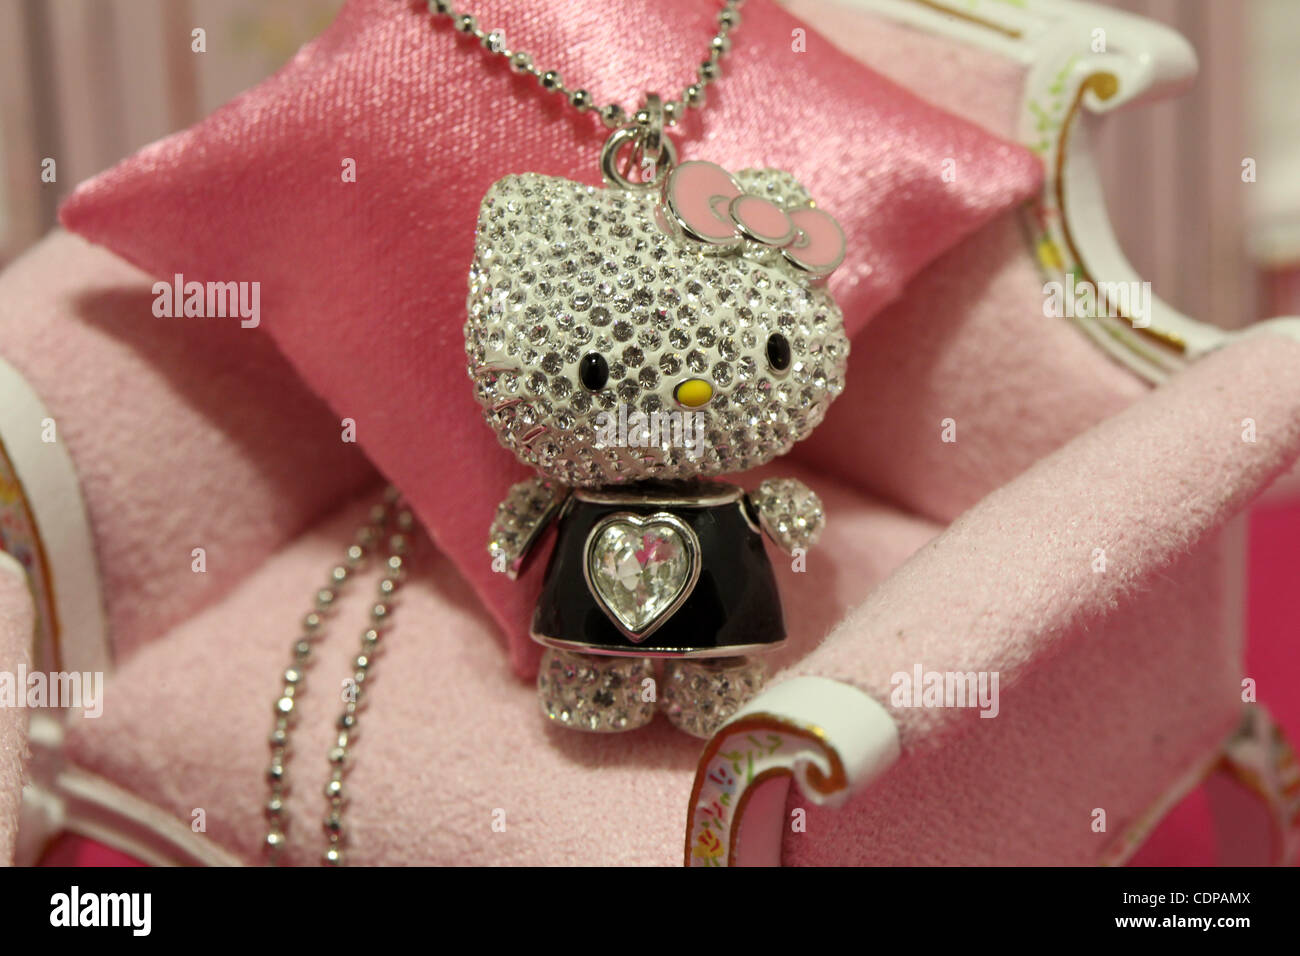 June 29, 2011 - Tokyo, Japan - Hello Kitty jewelries collaborated with  Swarovski are on display during an event ''SWAROVSKI Presents 'House o Kitty'''  at Omotesando Hill in Tokyo, Japan on June